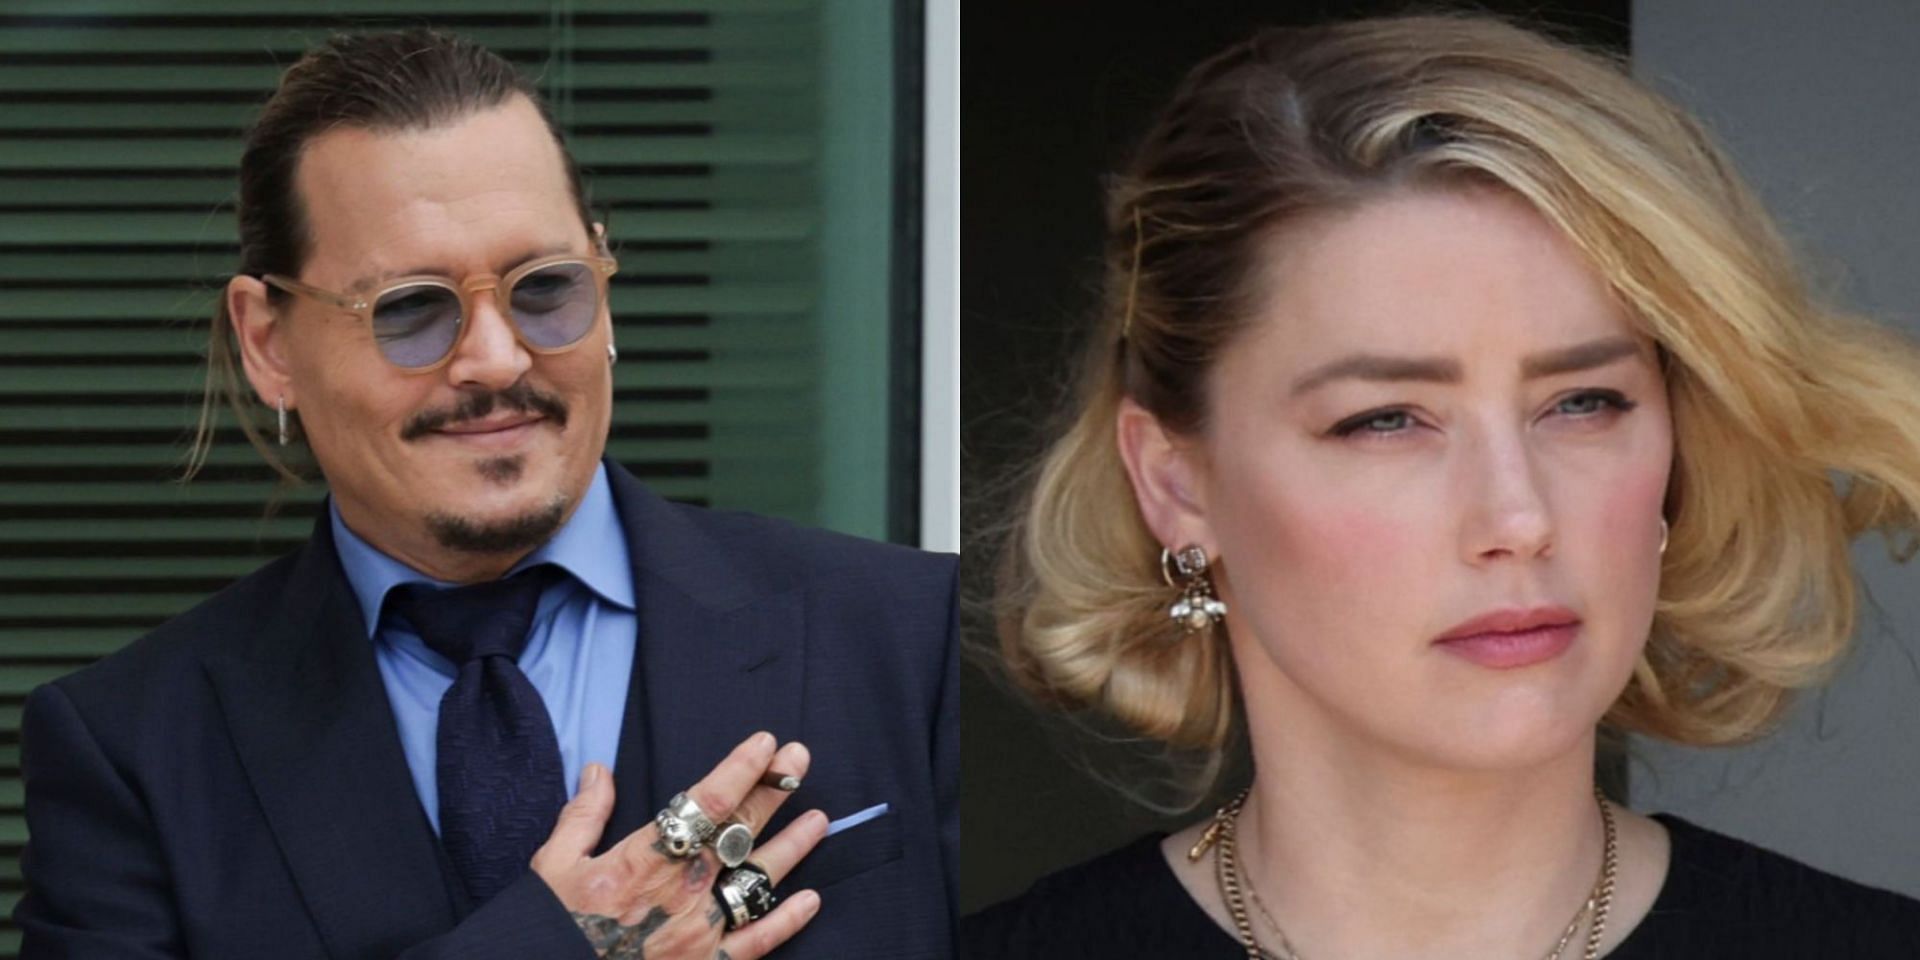 Johnny Depp won the defamation lawsuit against his ex-wife Amber Heard (Image via Getty Images)